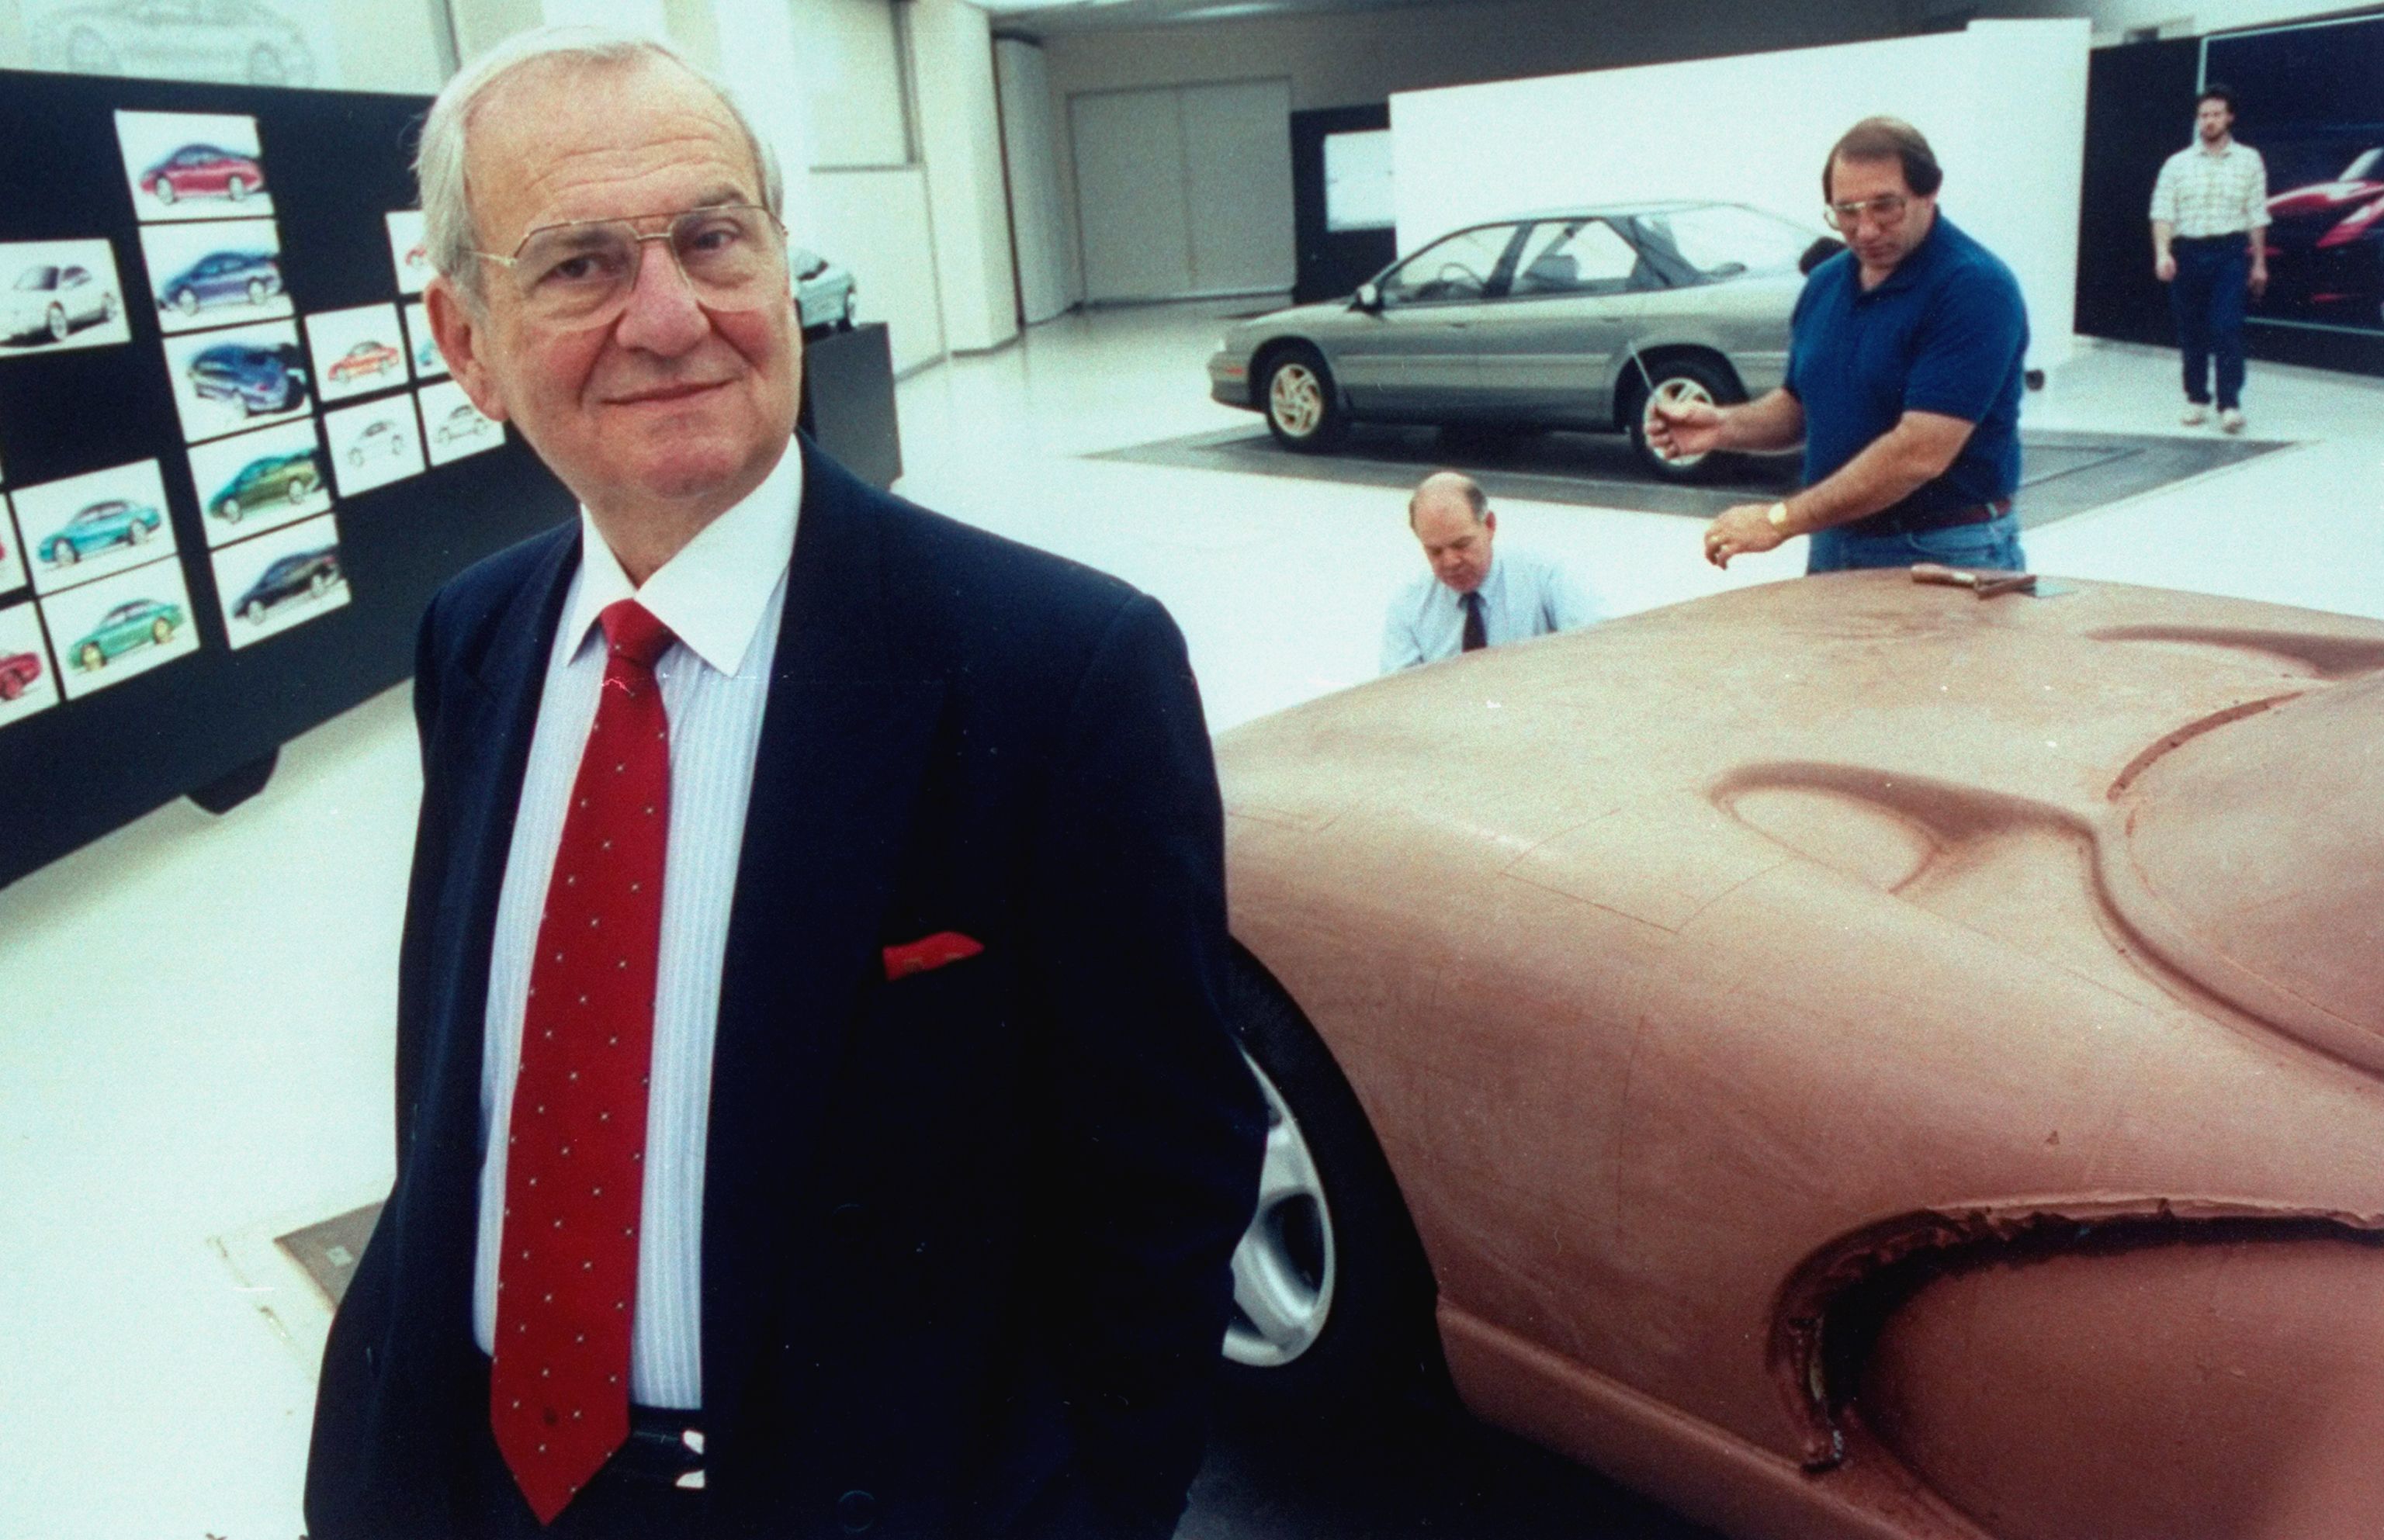 Lee Iacocca, Ford and Chrysler Exec, Dead at Age 94 - Obituary